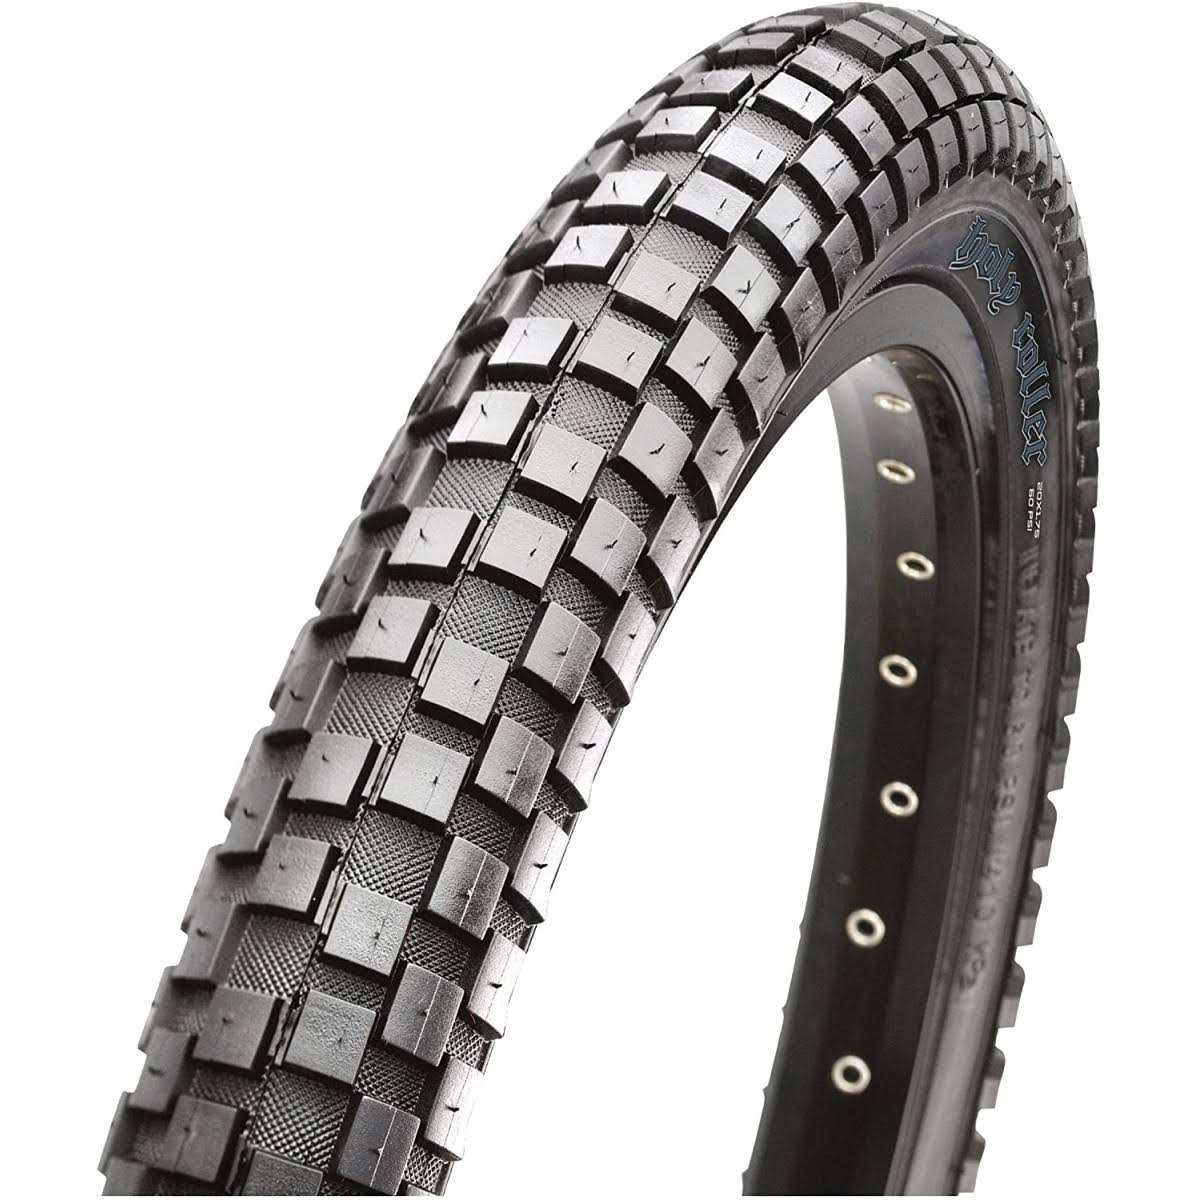 Maxxis Holy Roller BMX/Urban Bike Tire - Wire Beaded 62a, 26"x2.2"